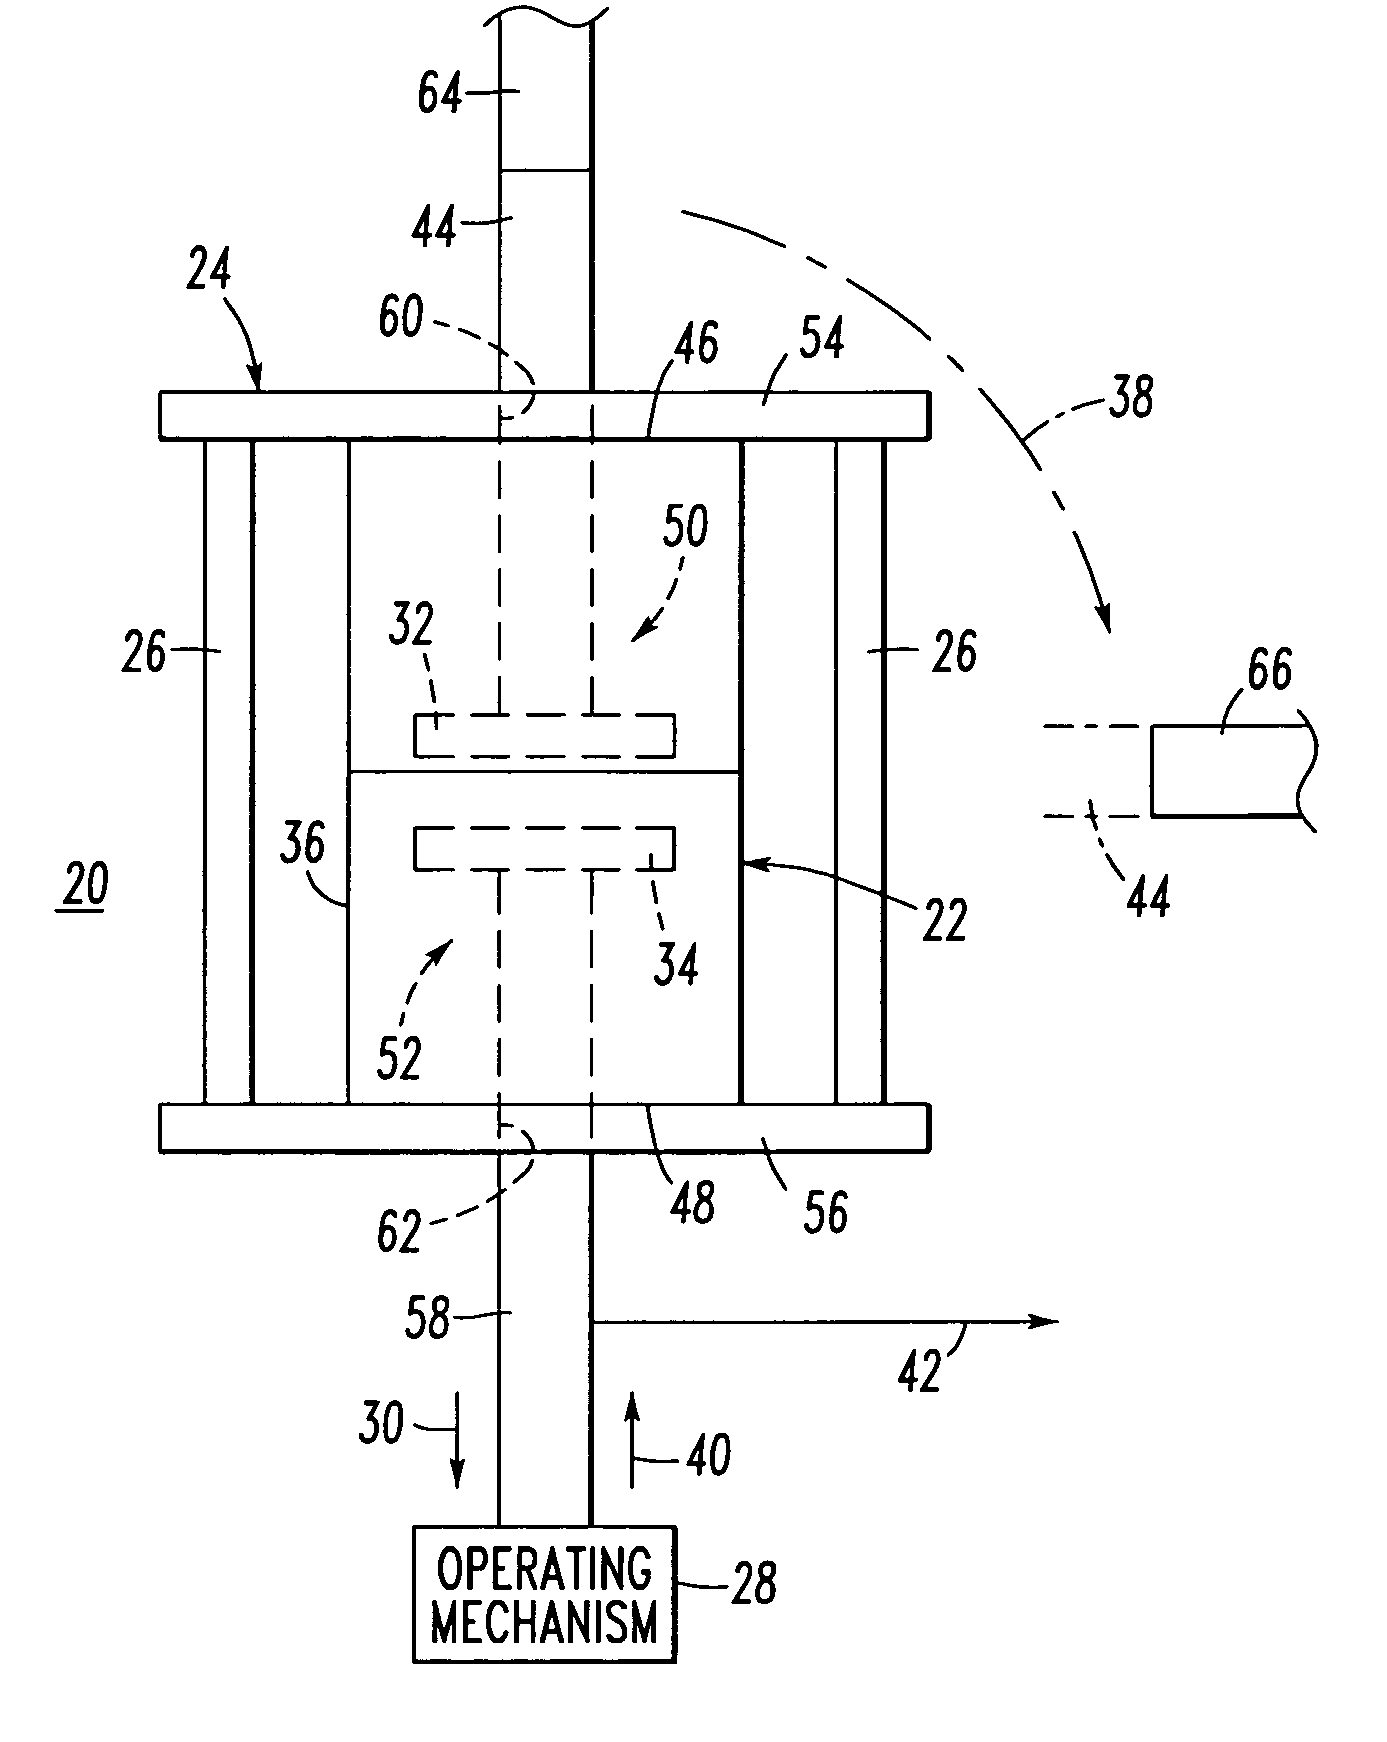 Three-position vacuum interrupter disconnect switch providing current interruption, disconnection and grounding